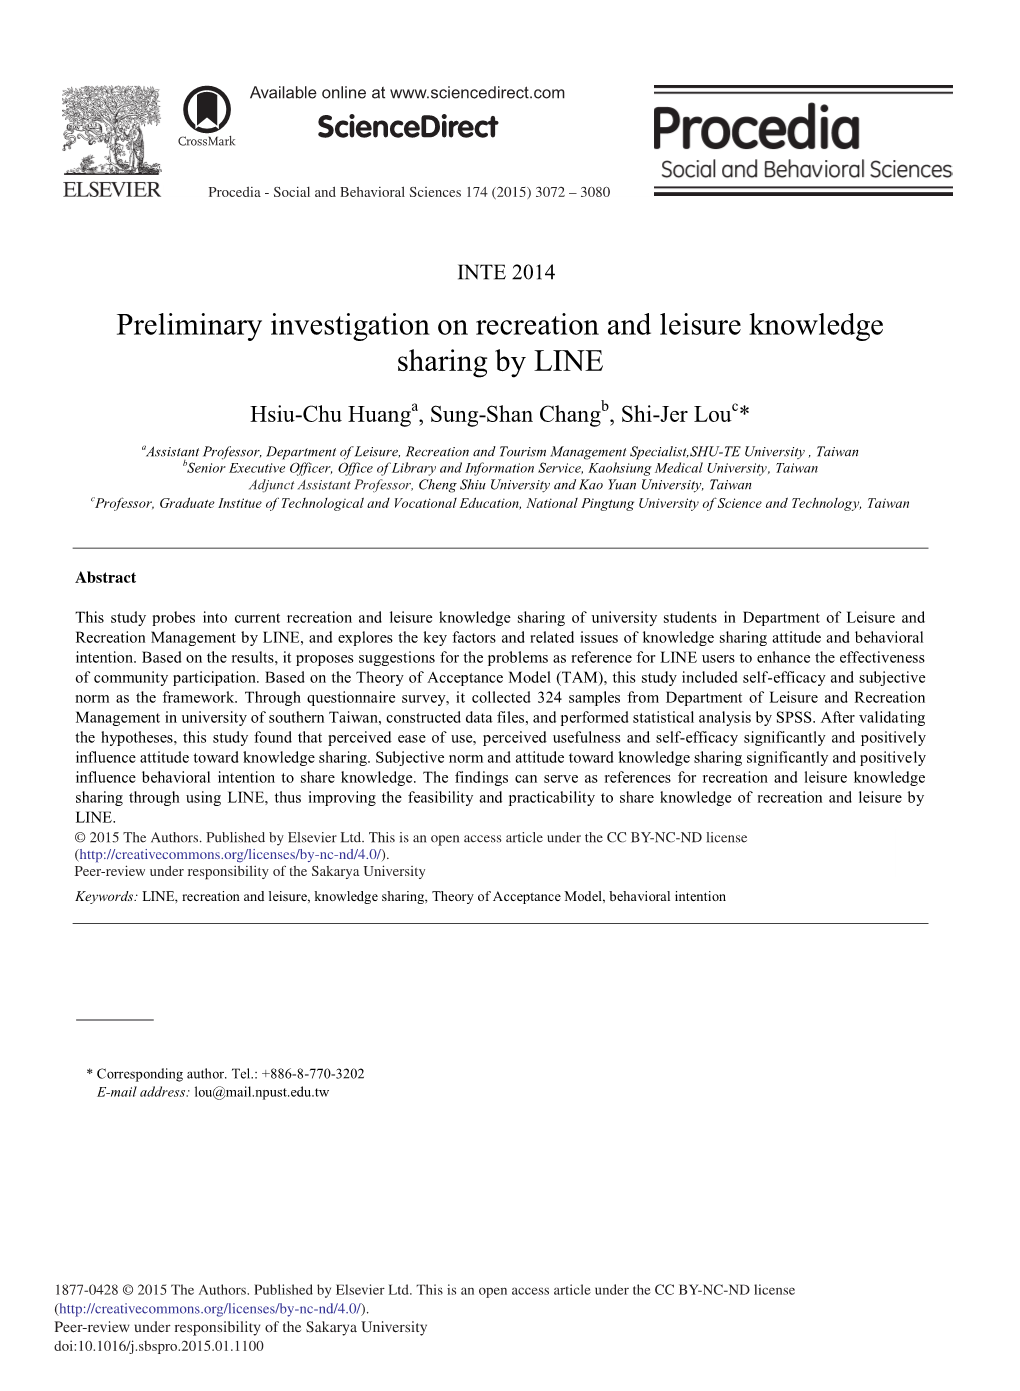 Preliminary Investigation on Recreation and Leisure Knowledge Sharing by LINE